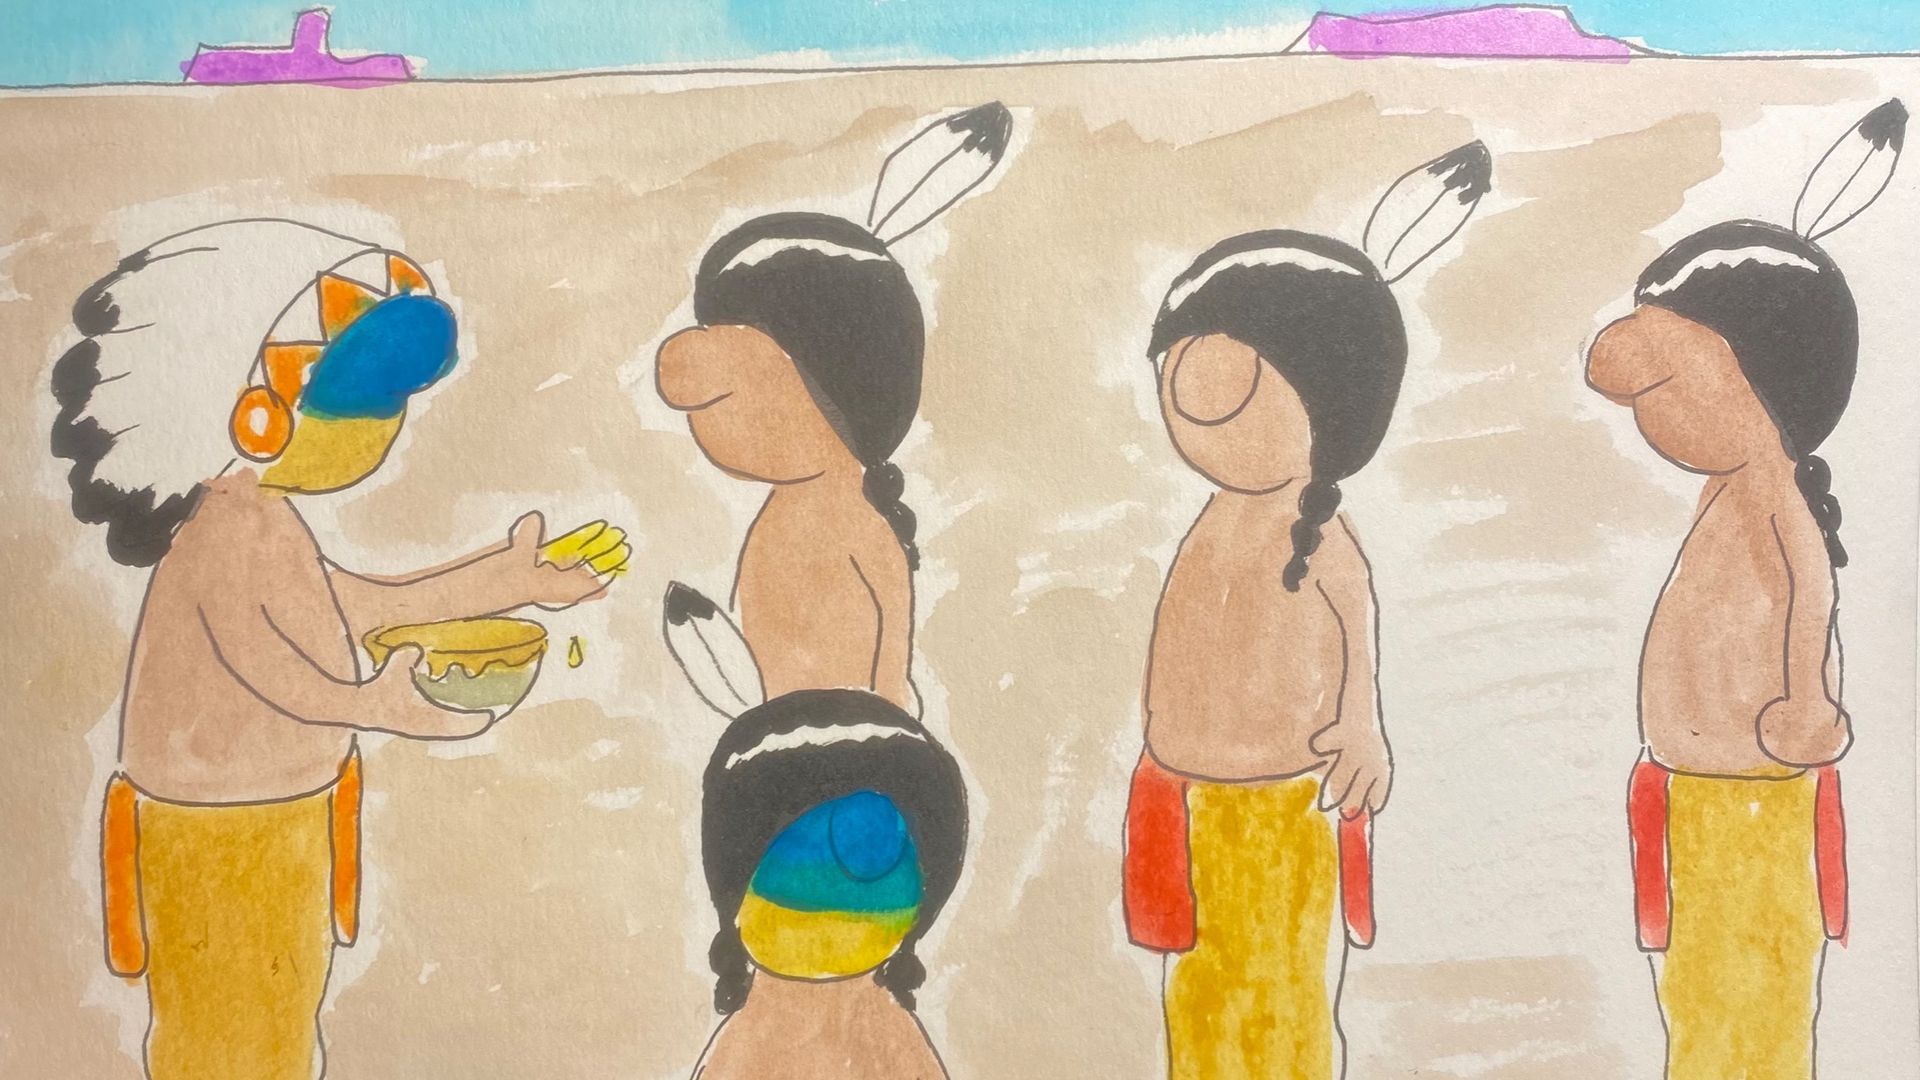 A cartoon by Ricardo Caté shows a Native American chief putting face paint with the Ukrainian colors on tribal members.